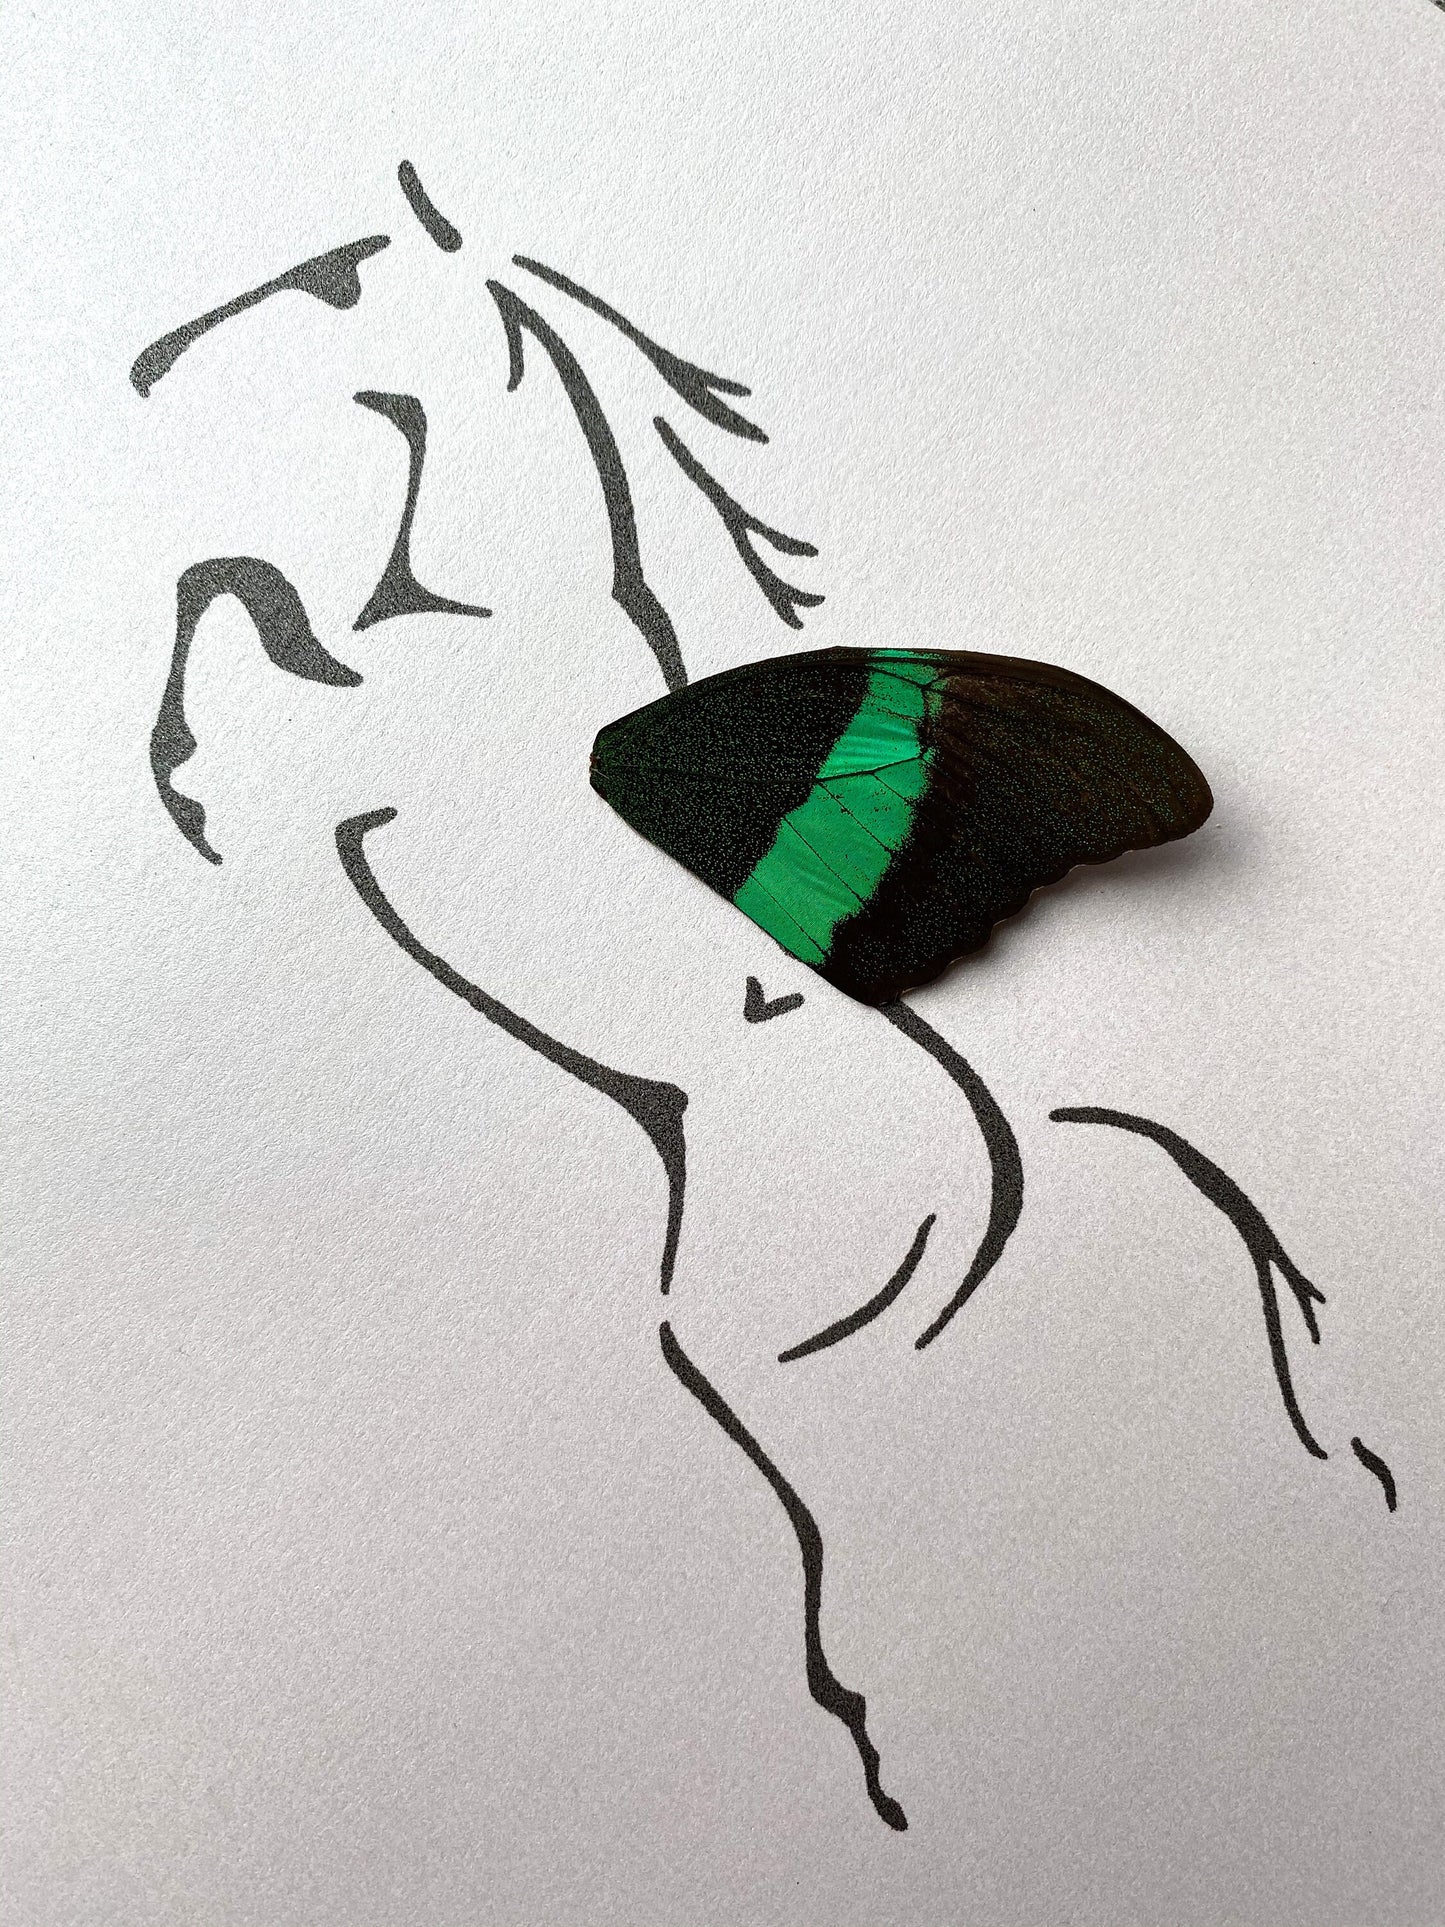 Pegasus Horse Real Butterfly Wing Framed Art Ethically Sourced Made in MN - Holly Ulm - Isms Butterfly Conservation Art